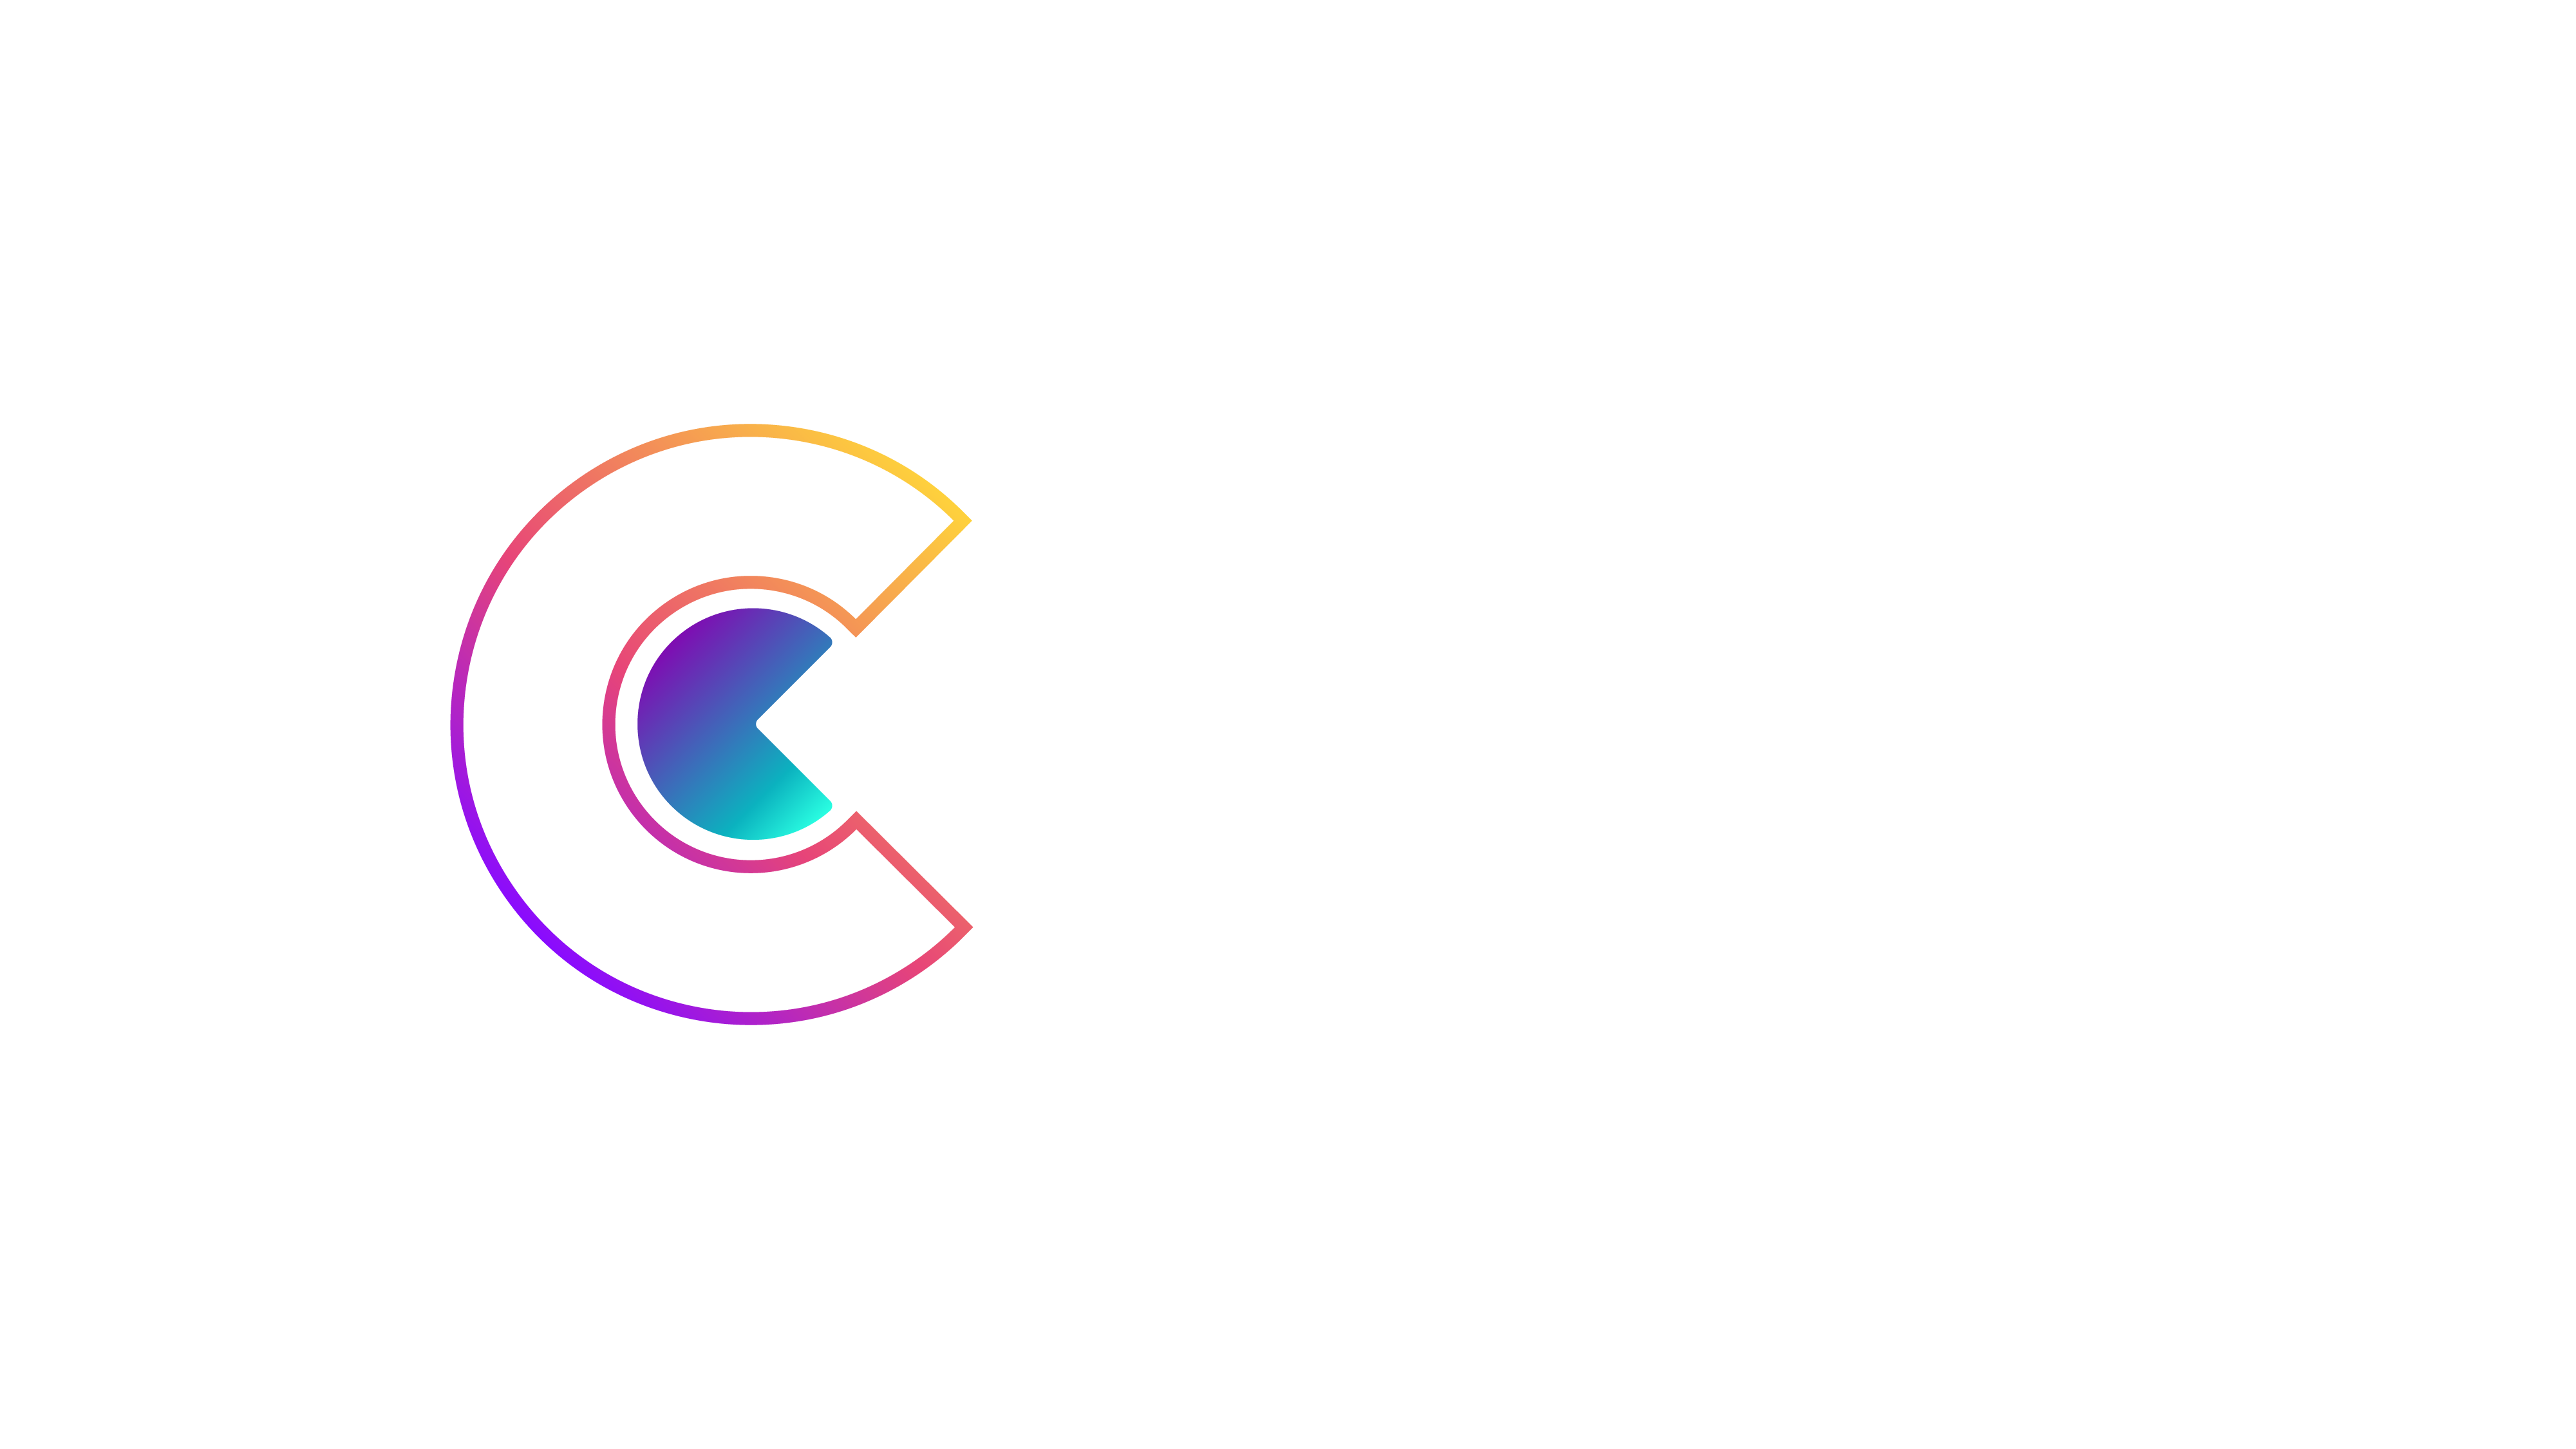 click and count